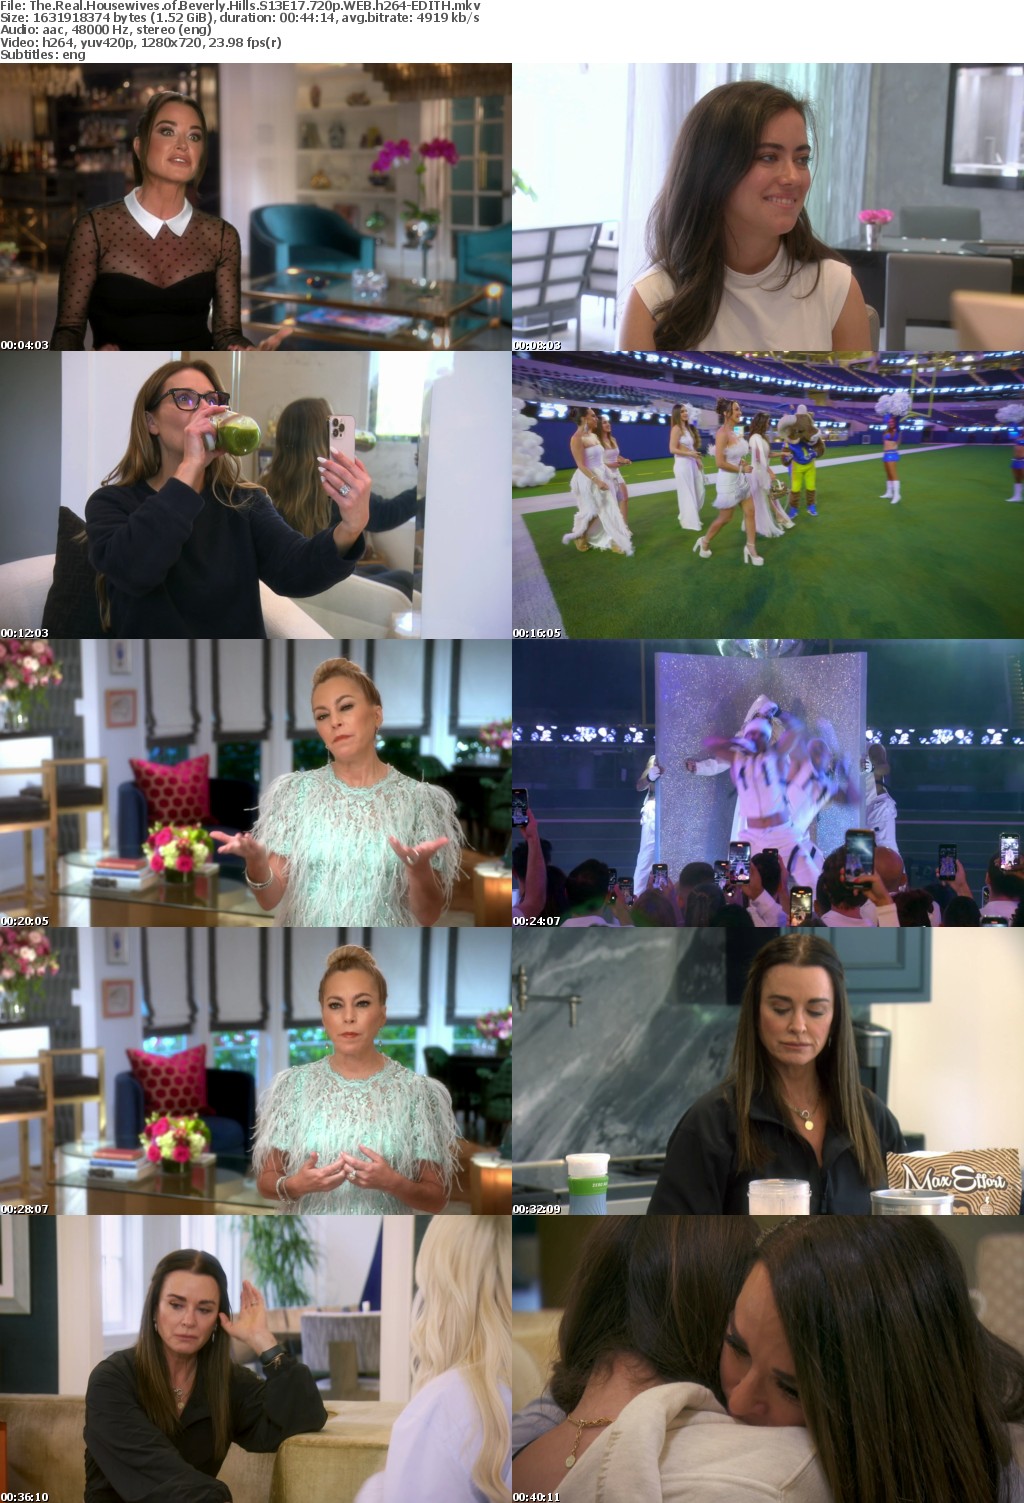 The Real Housewives of Beverly Hills S13E17 720p WEB h264-EDITH